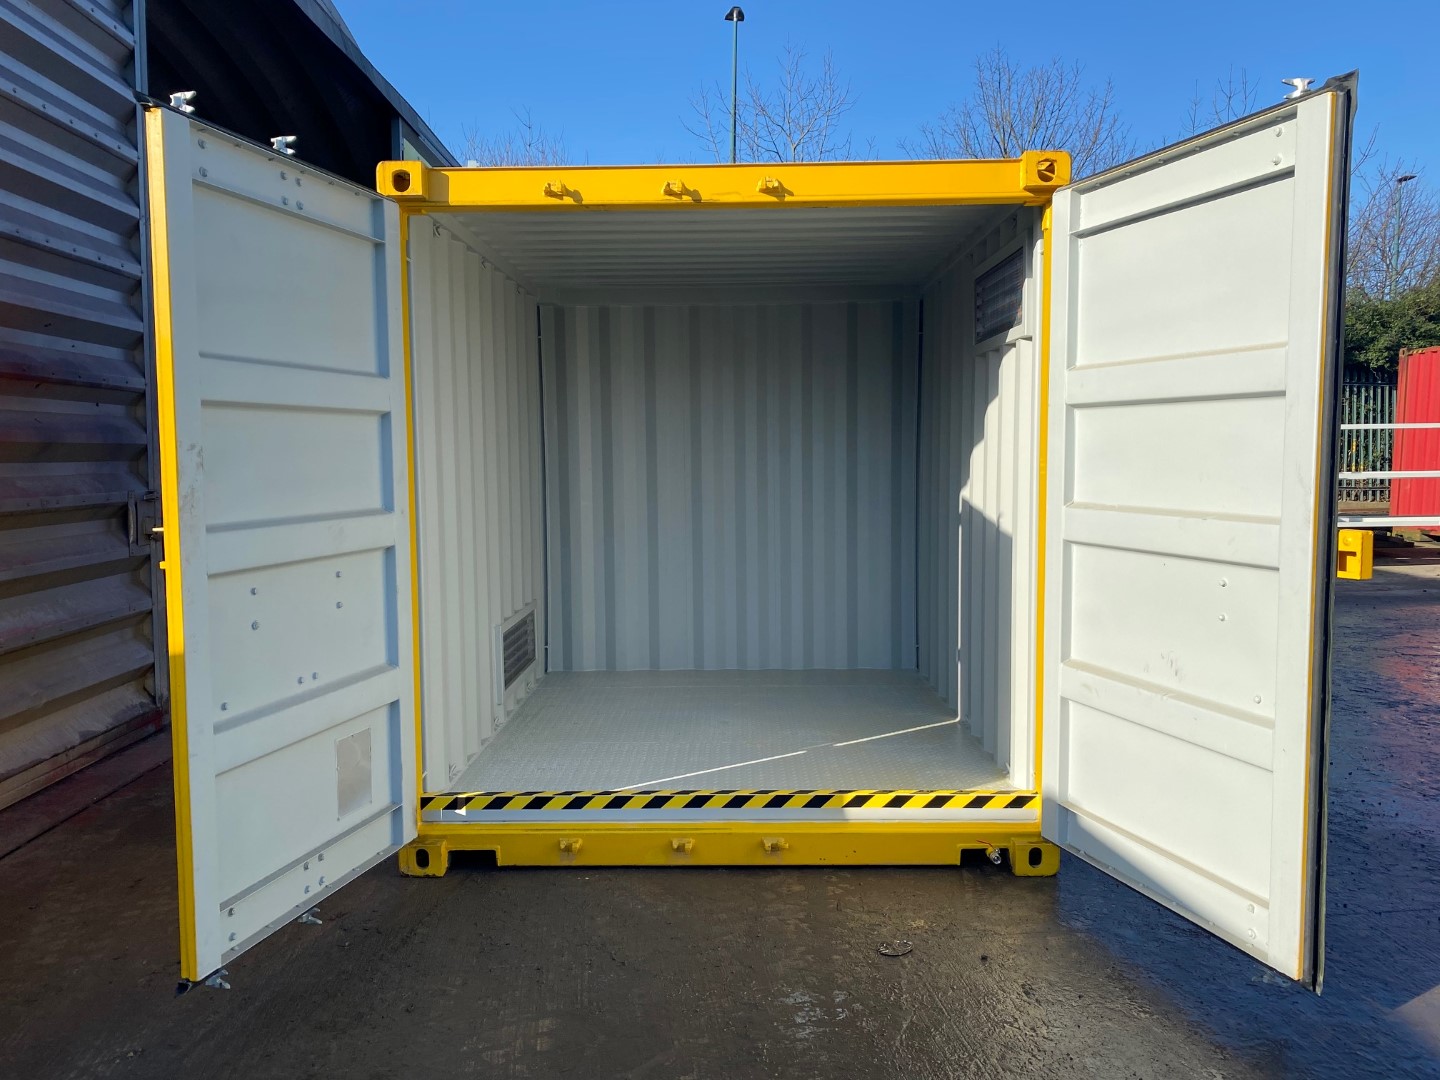 Providers of Secure Chemical Storage Units UK